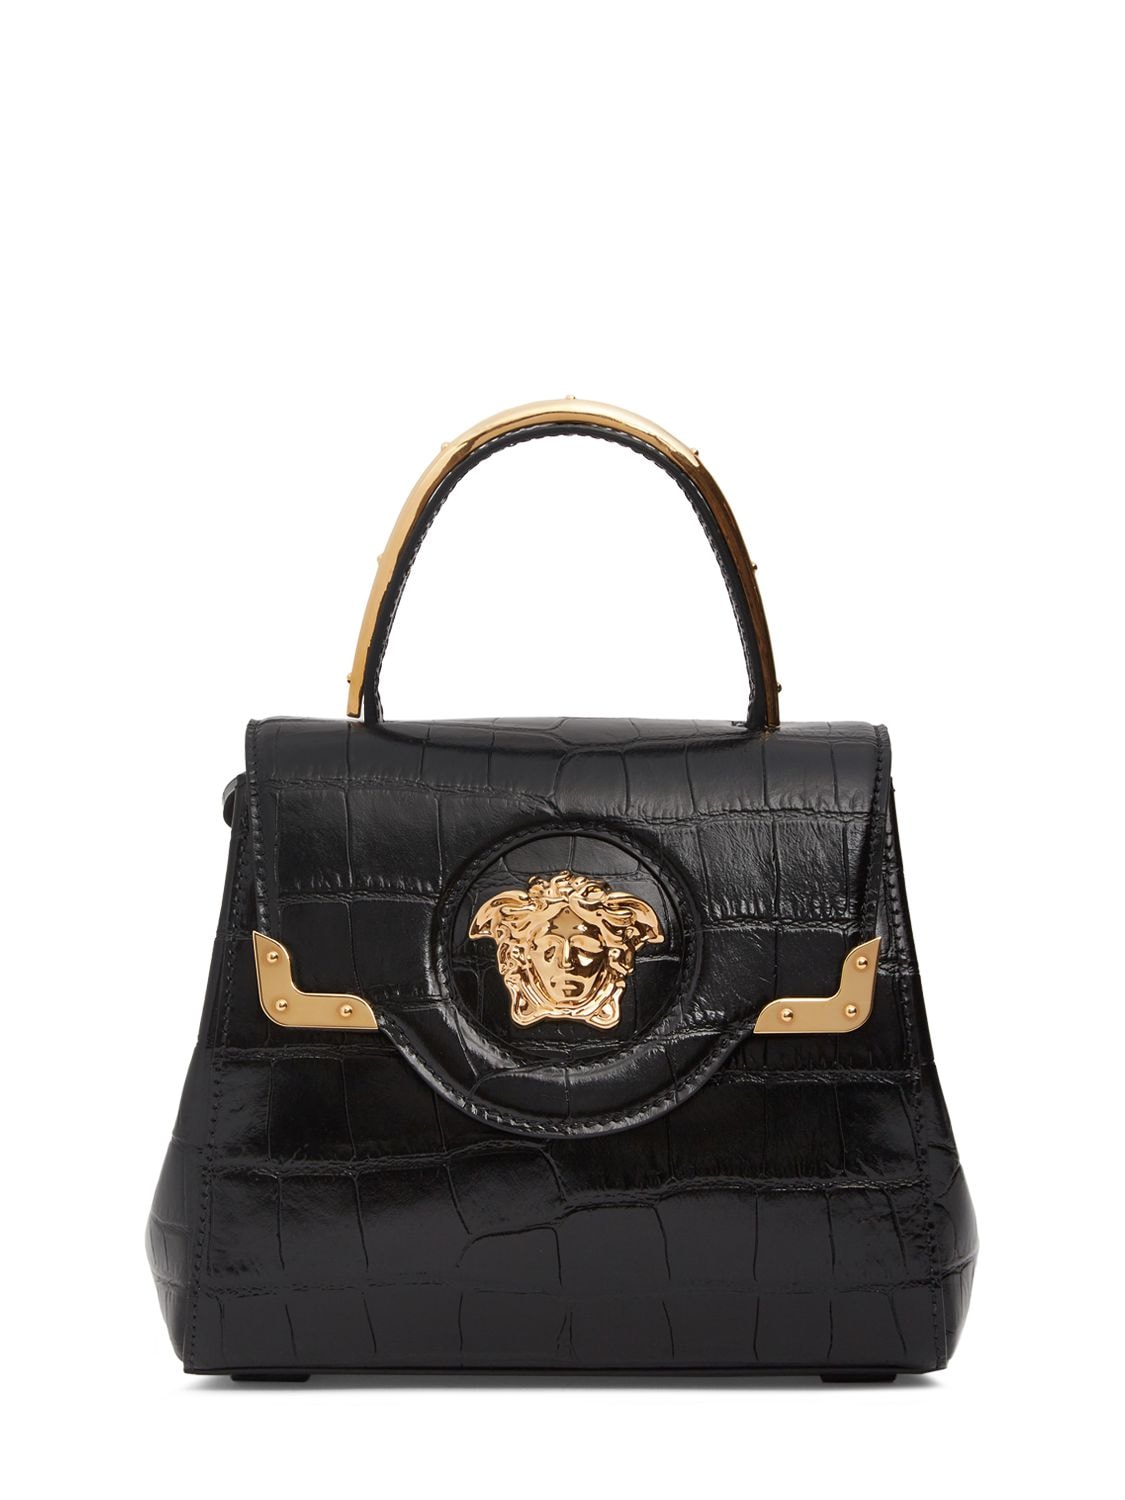 Image of Croc Embossed Leather Top Handle Bag